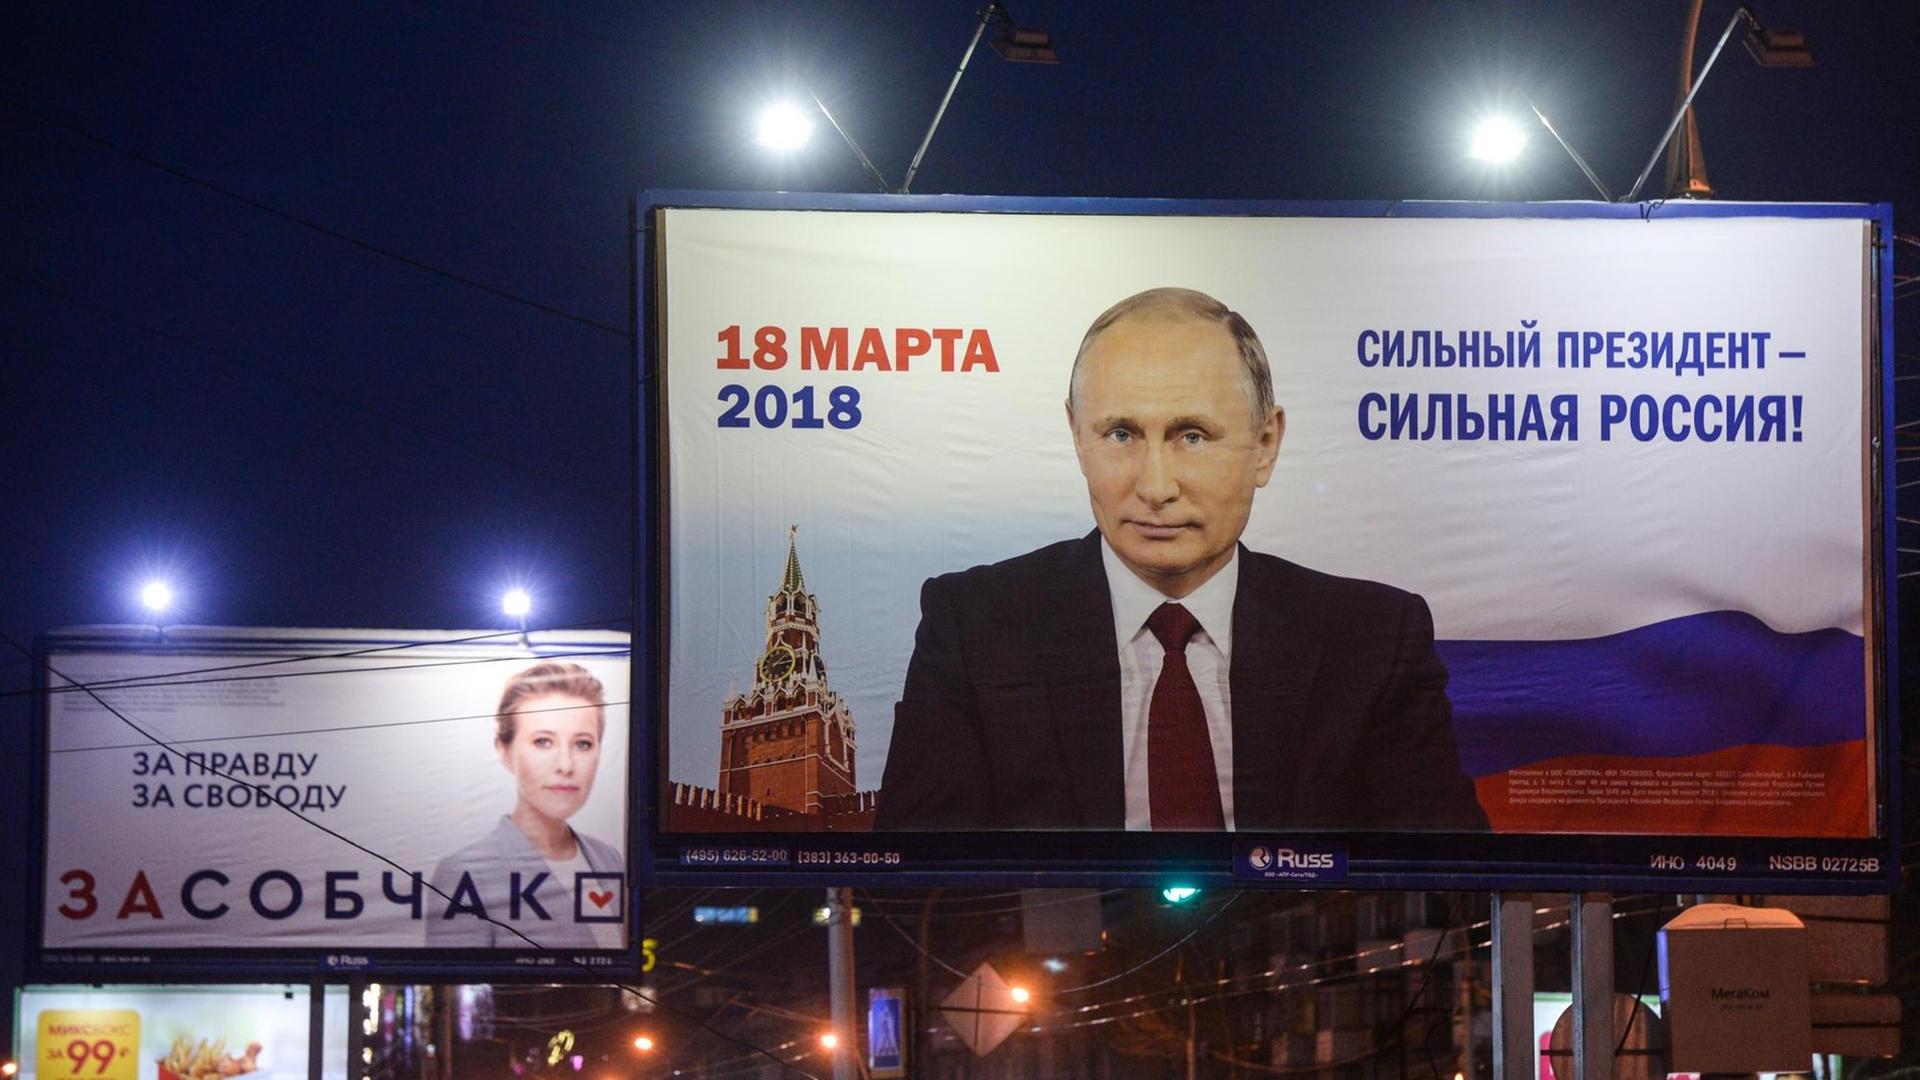 3305812 02/20/2018 Election campaign posters in Novosibirsk. Alexandr Kryazhev/Sputnik Foto: Alexandr Kryazhev/Sputnik/dpa |